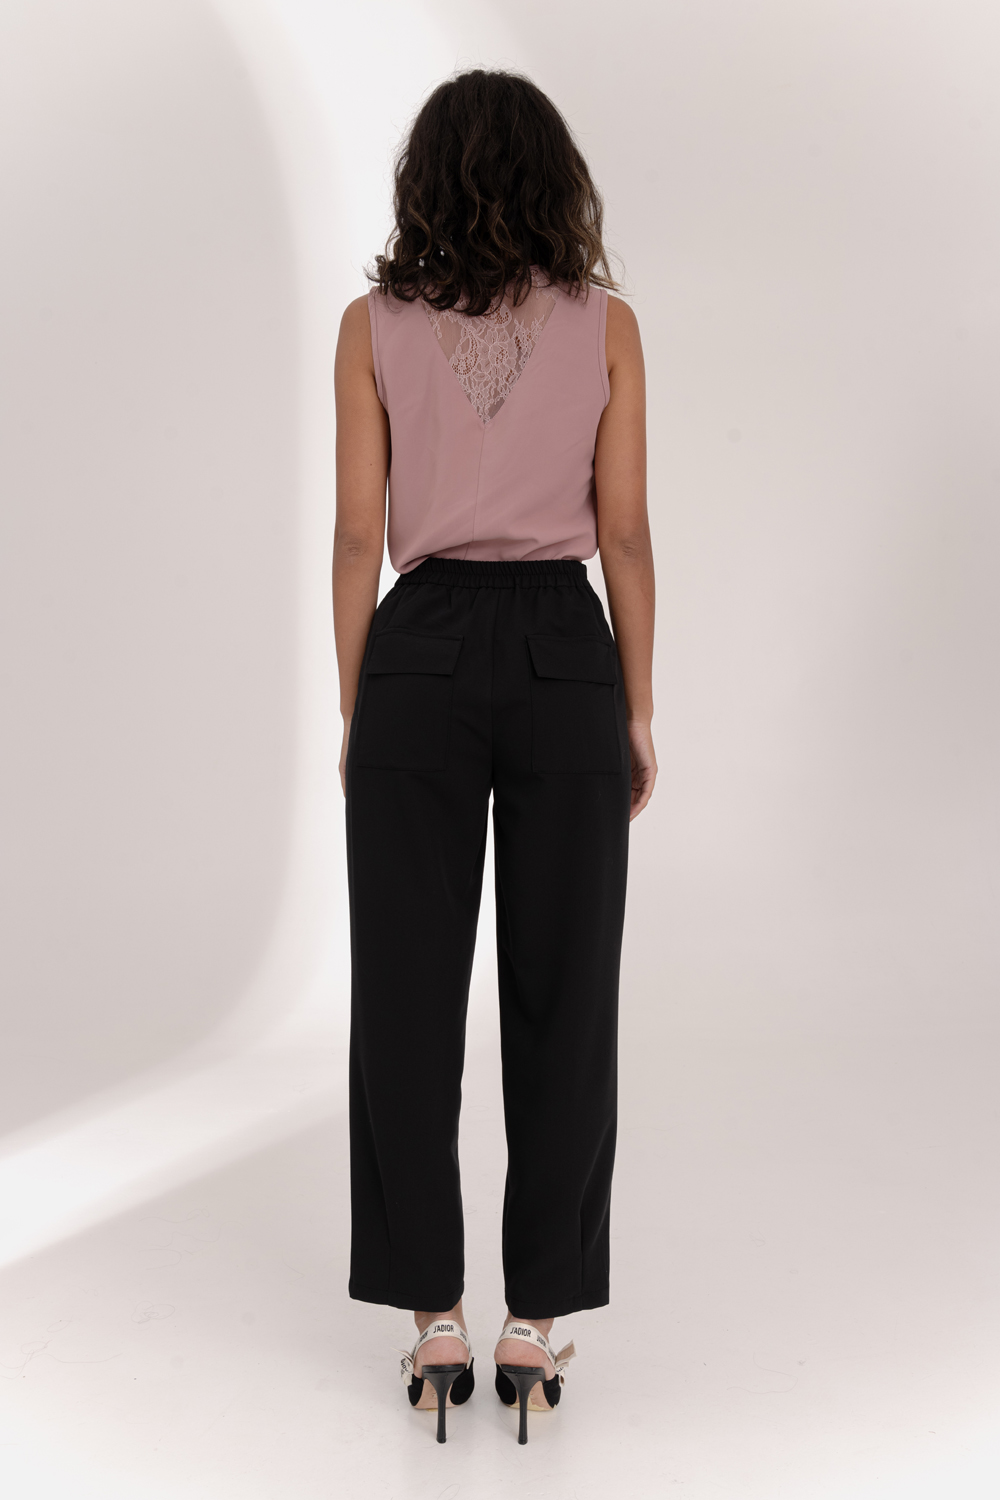 Black trousers with an elasticated waistband and pleats at the hem